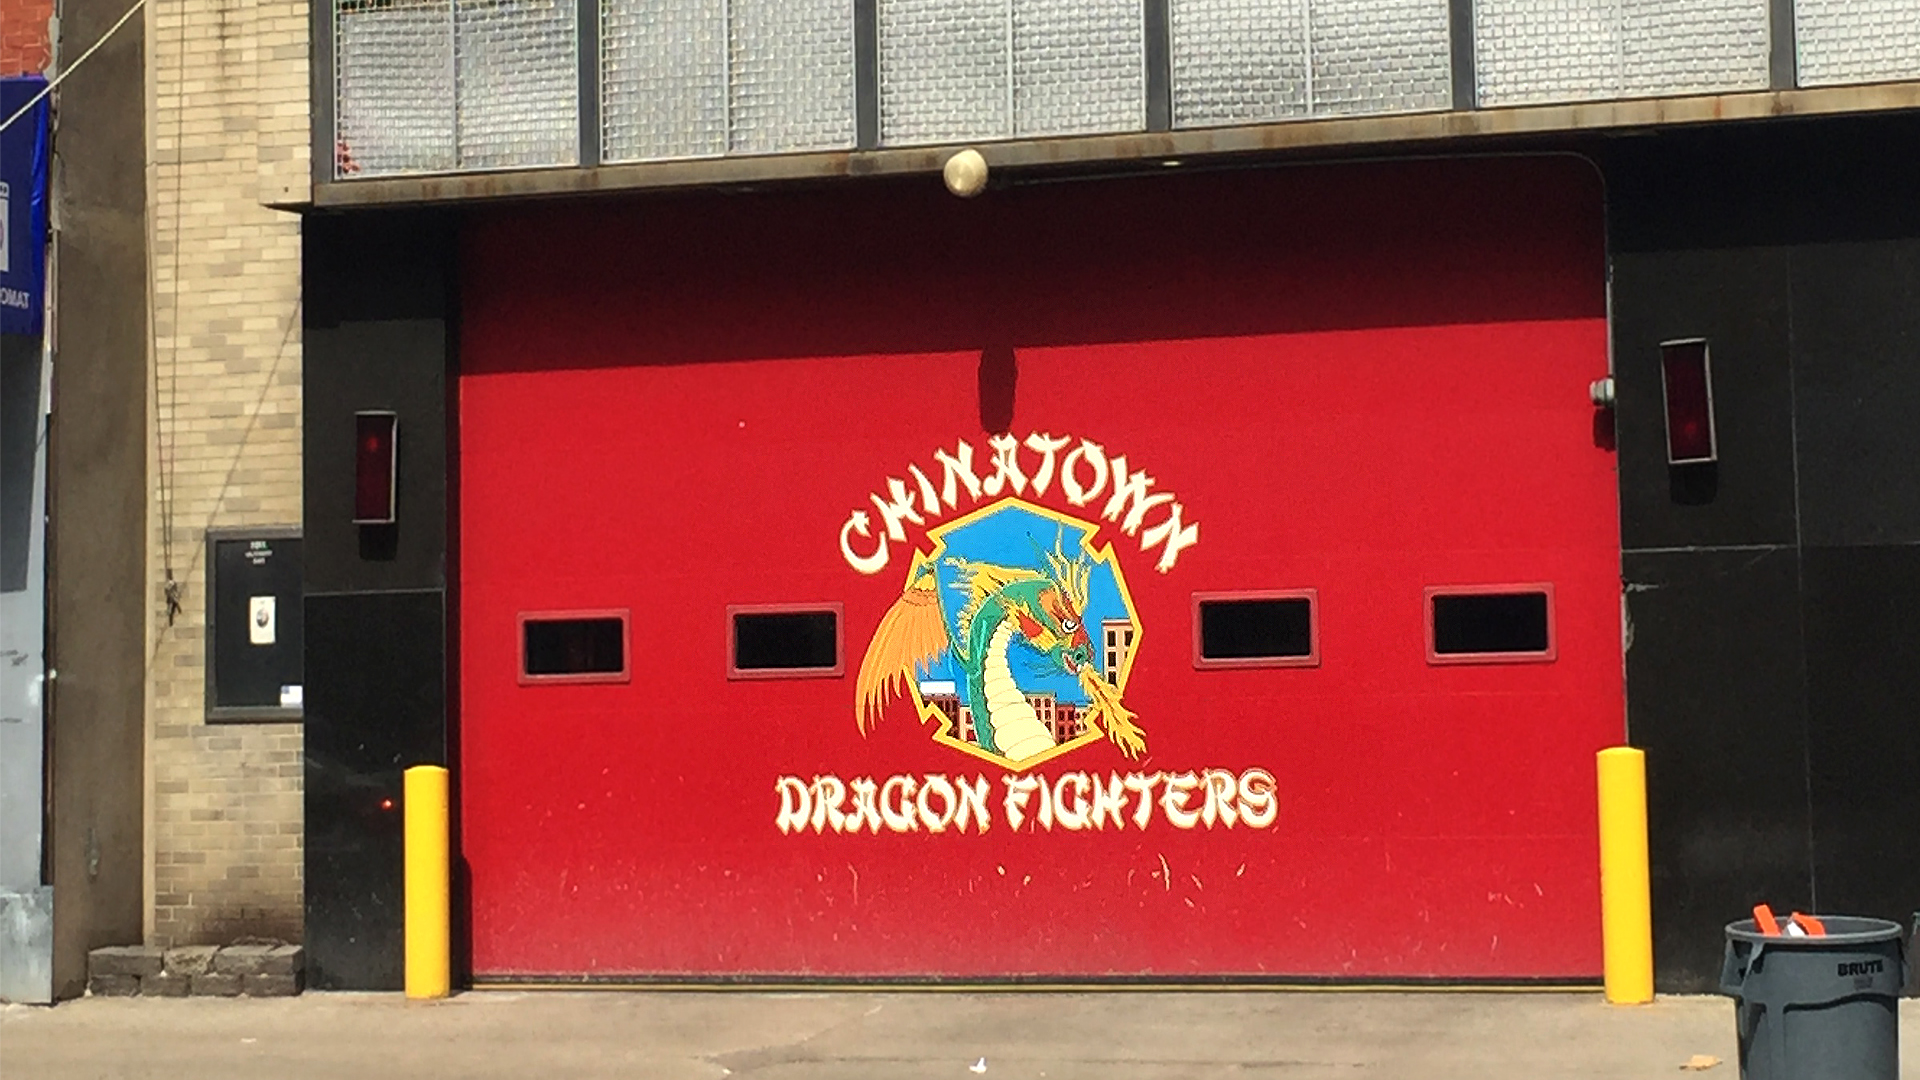 Chinatown firehouse called themselves Dragon Fighters on the firehouse door